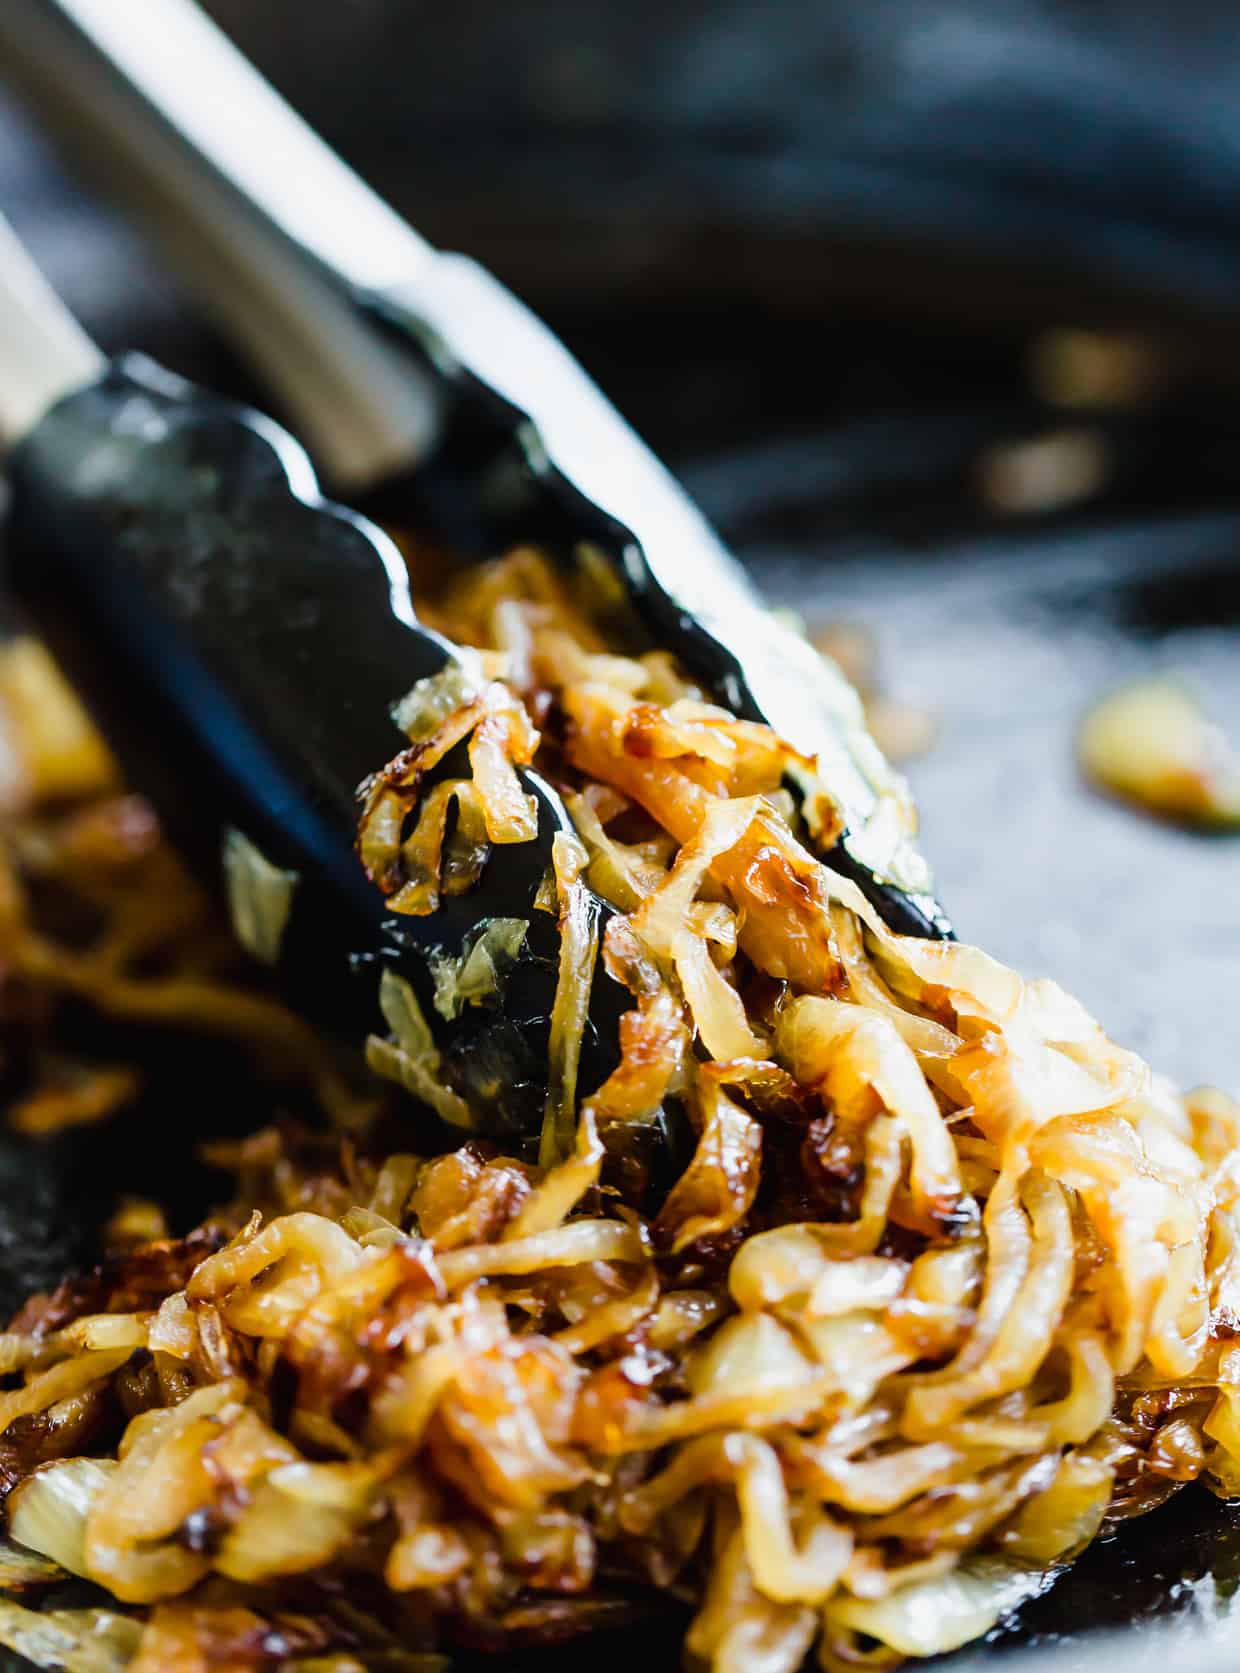 Fully caramelized onions with tongs grasping some of the onions.